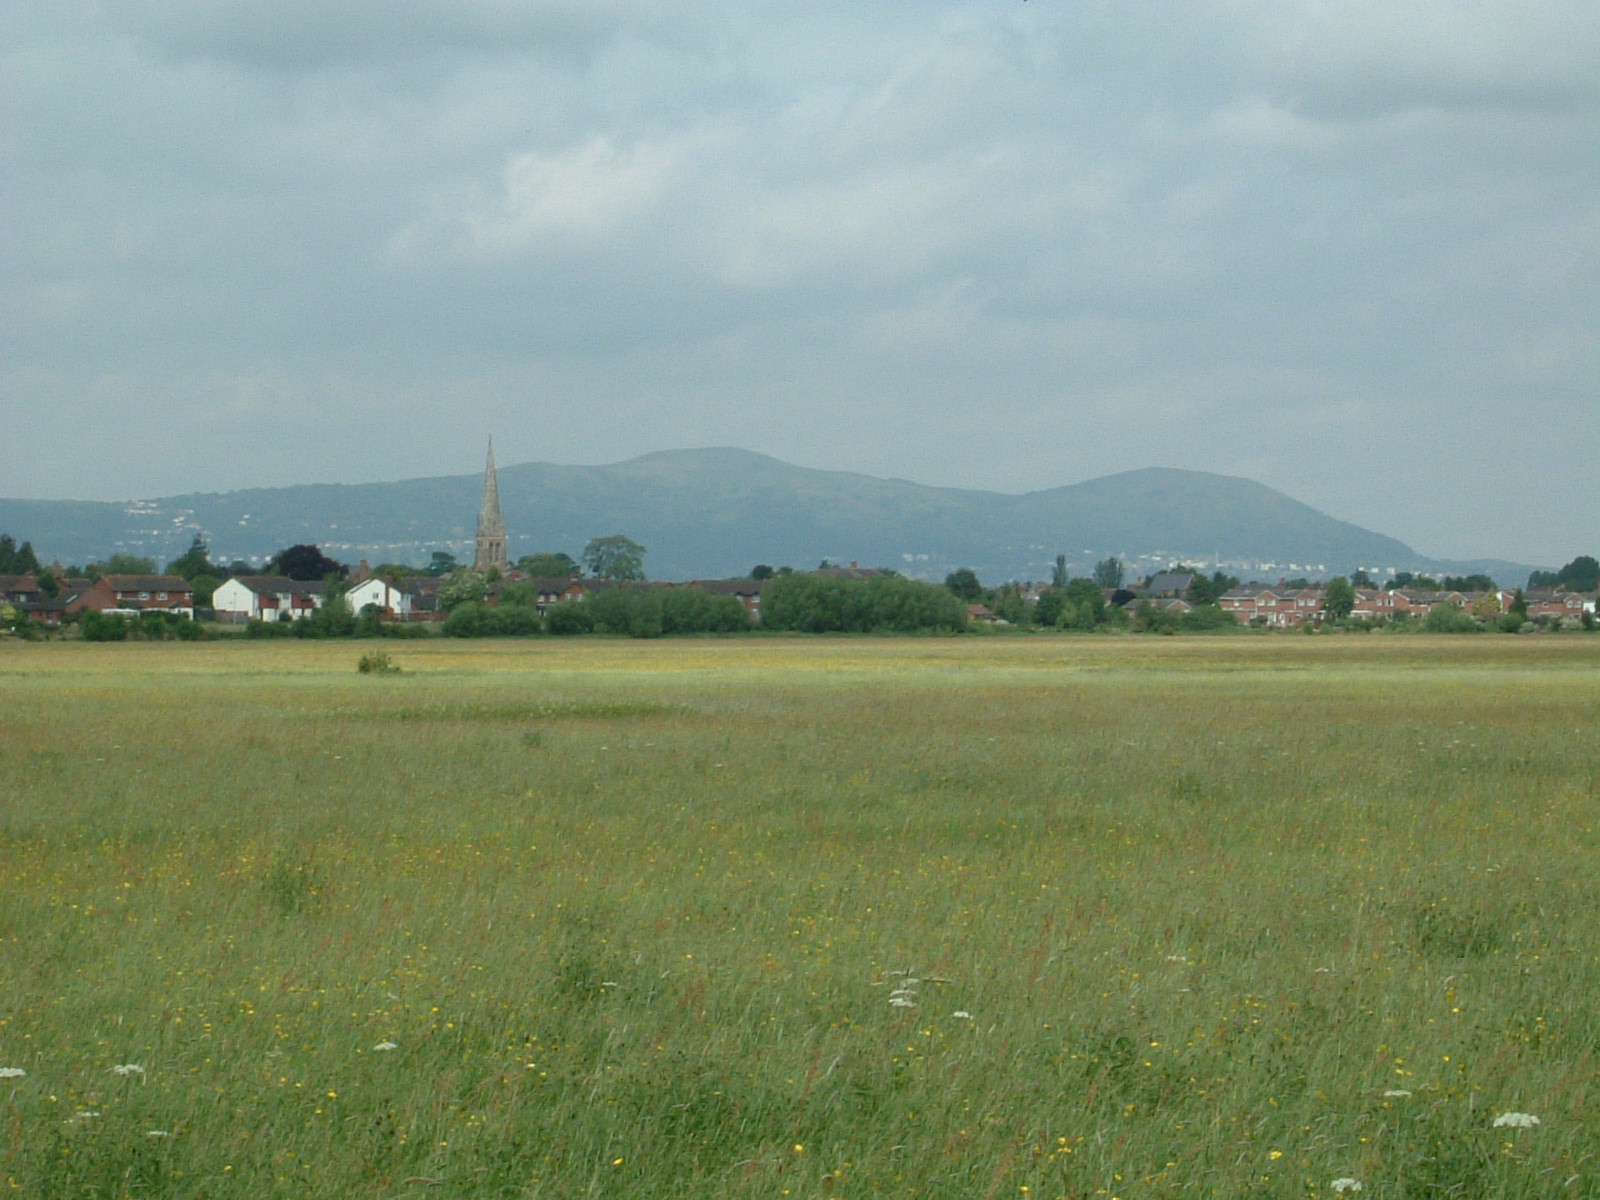 Upton-upon-Severn with the Malvern Hills in the background